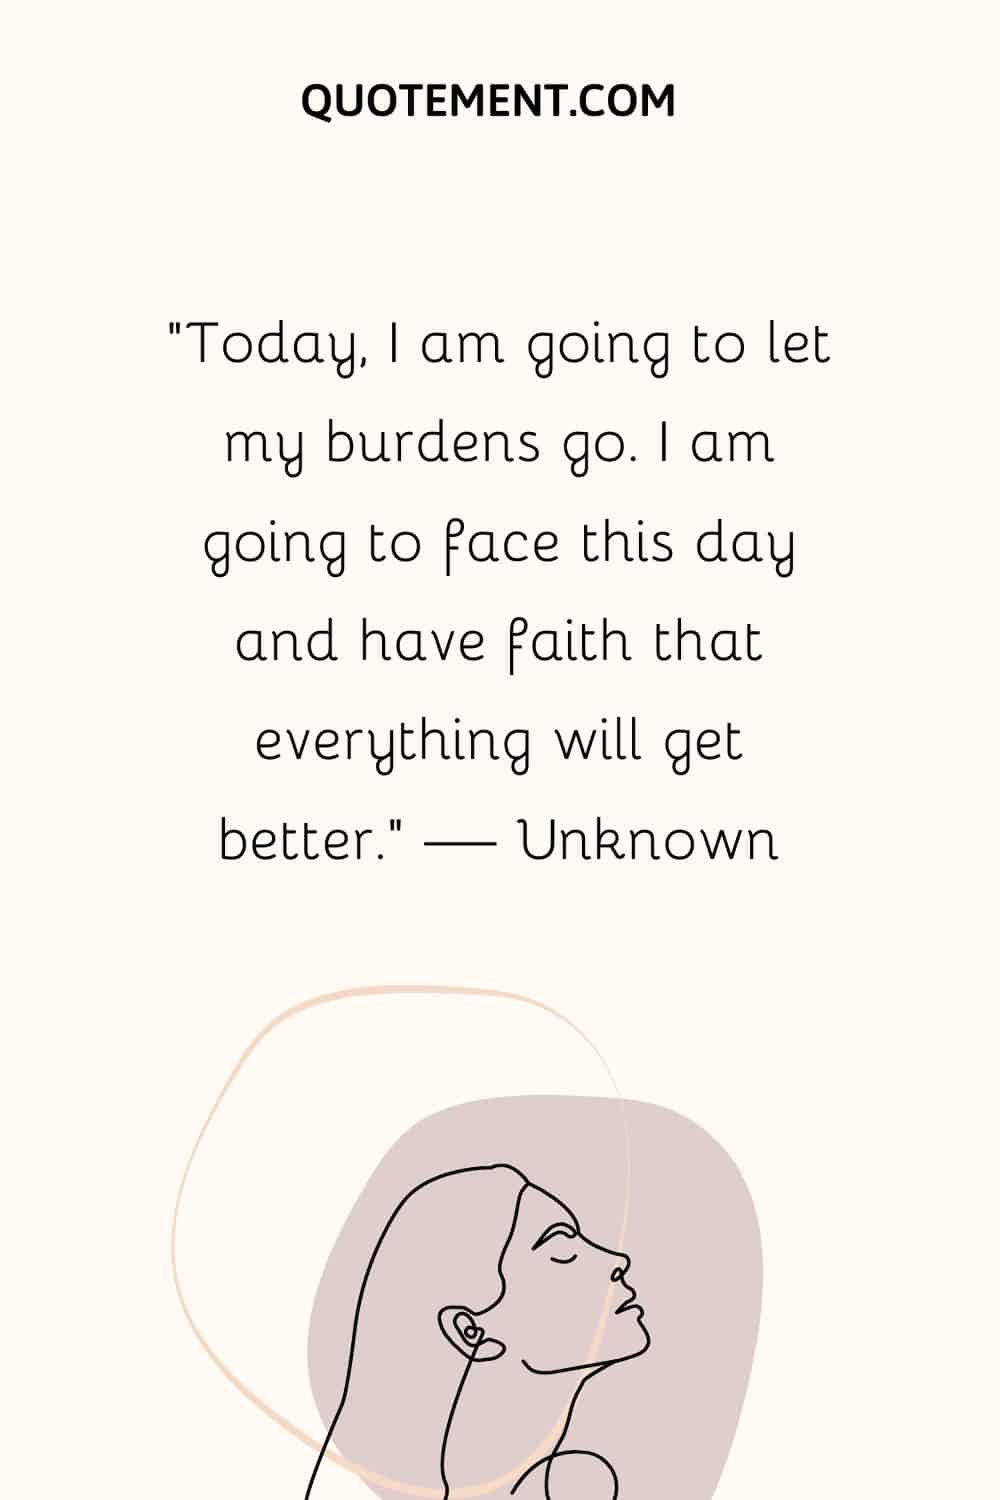 “Today, I am going to let my burdens go. I am going to face this day and have faith that everything will get better.” — Unknown